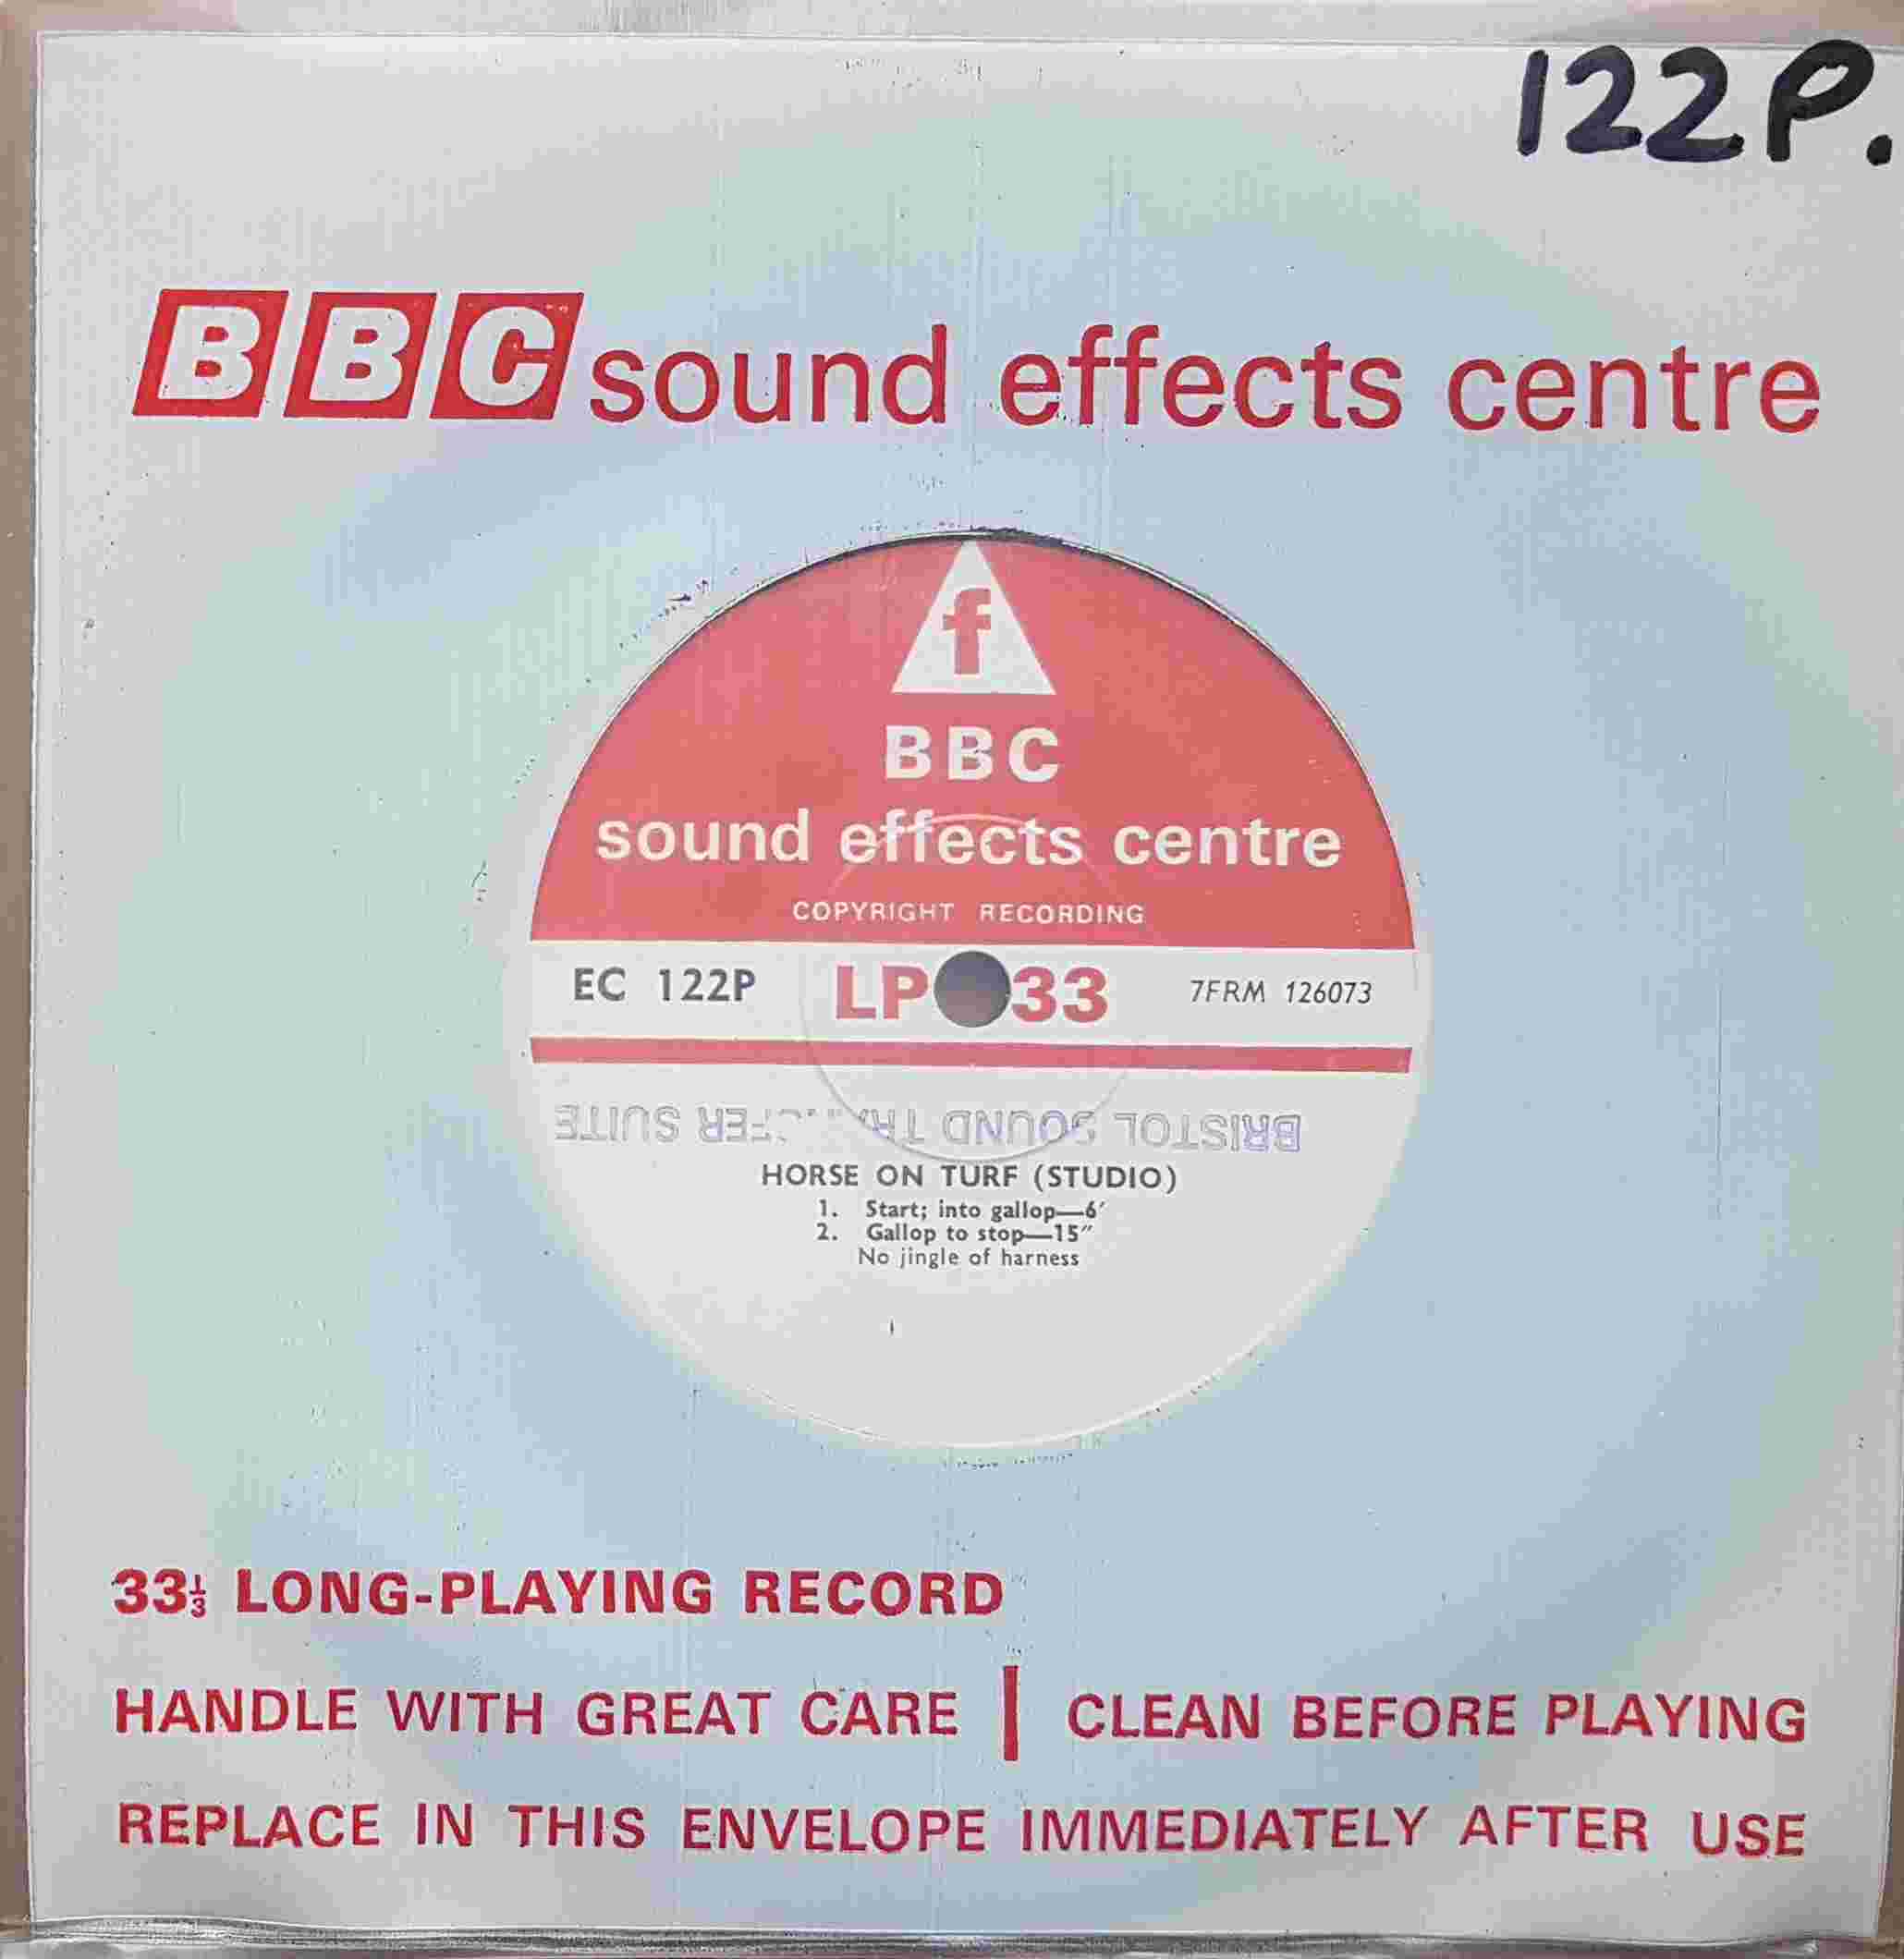 Picture of EC 122P Horse on turf (Studio) by artist Not registered from the BBC singles - Records and Tapes library